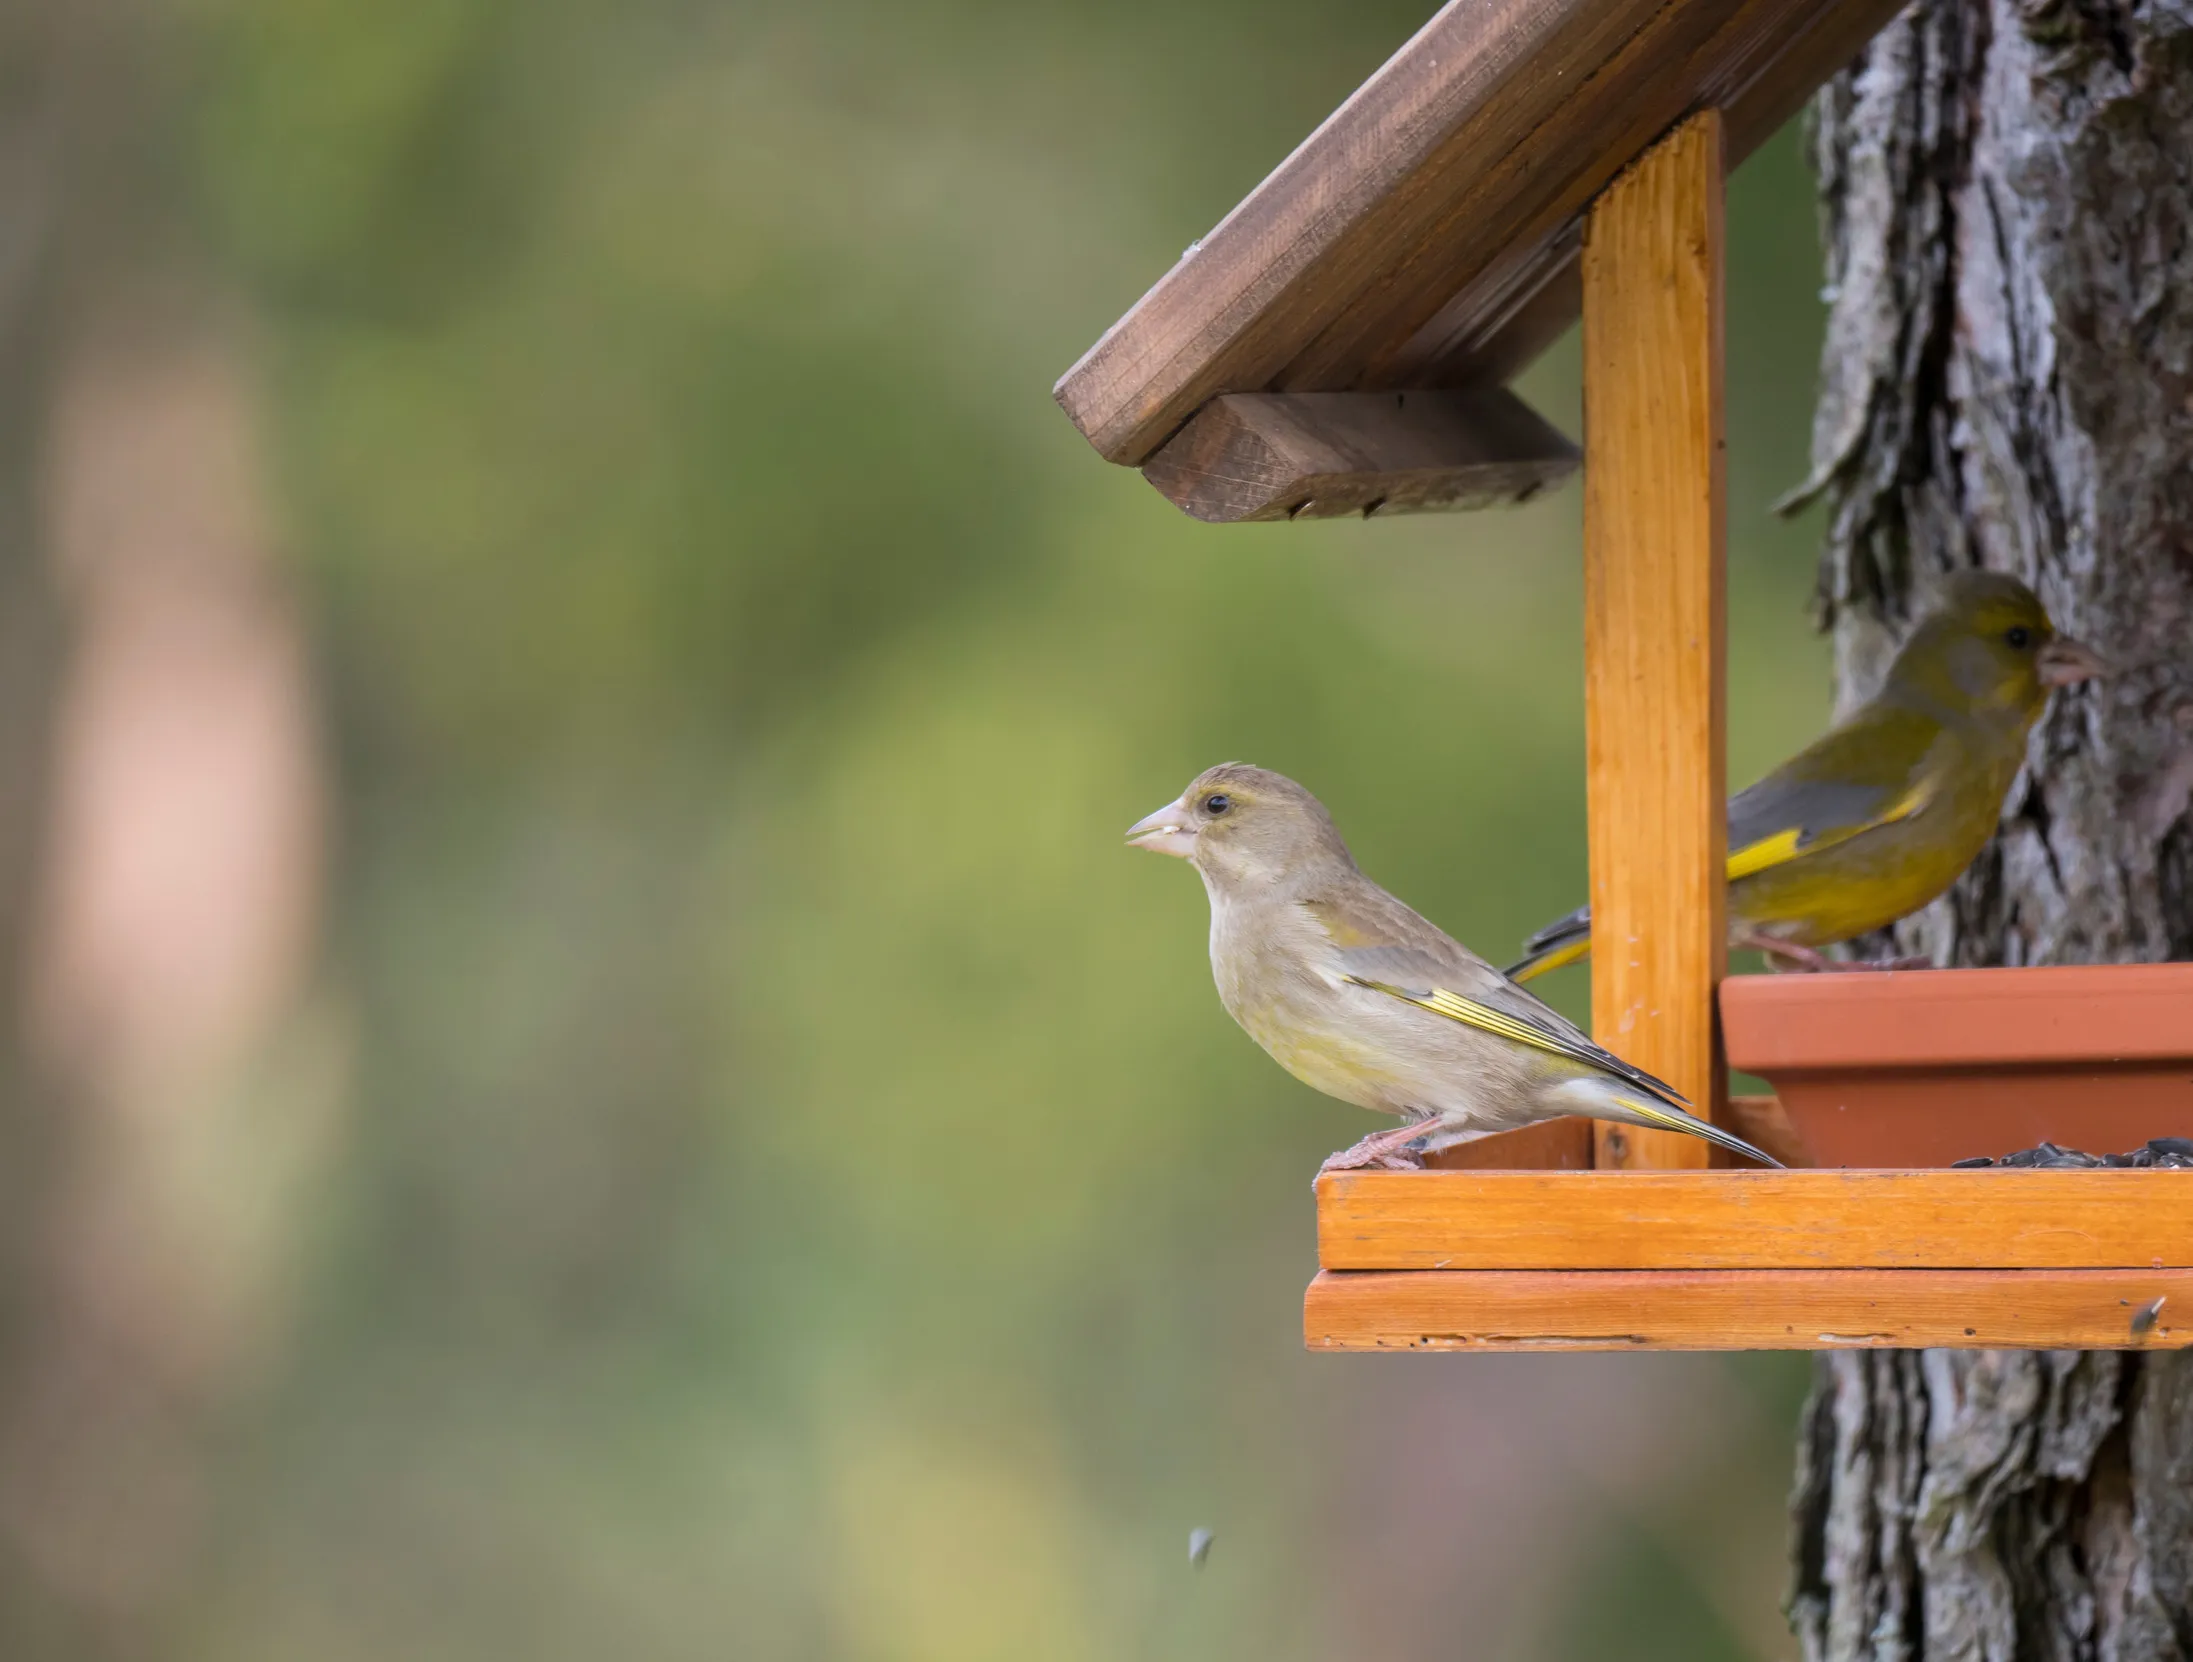 A pair of Greenfinch sat upon a bird table.